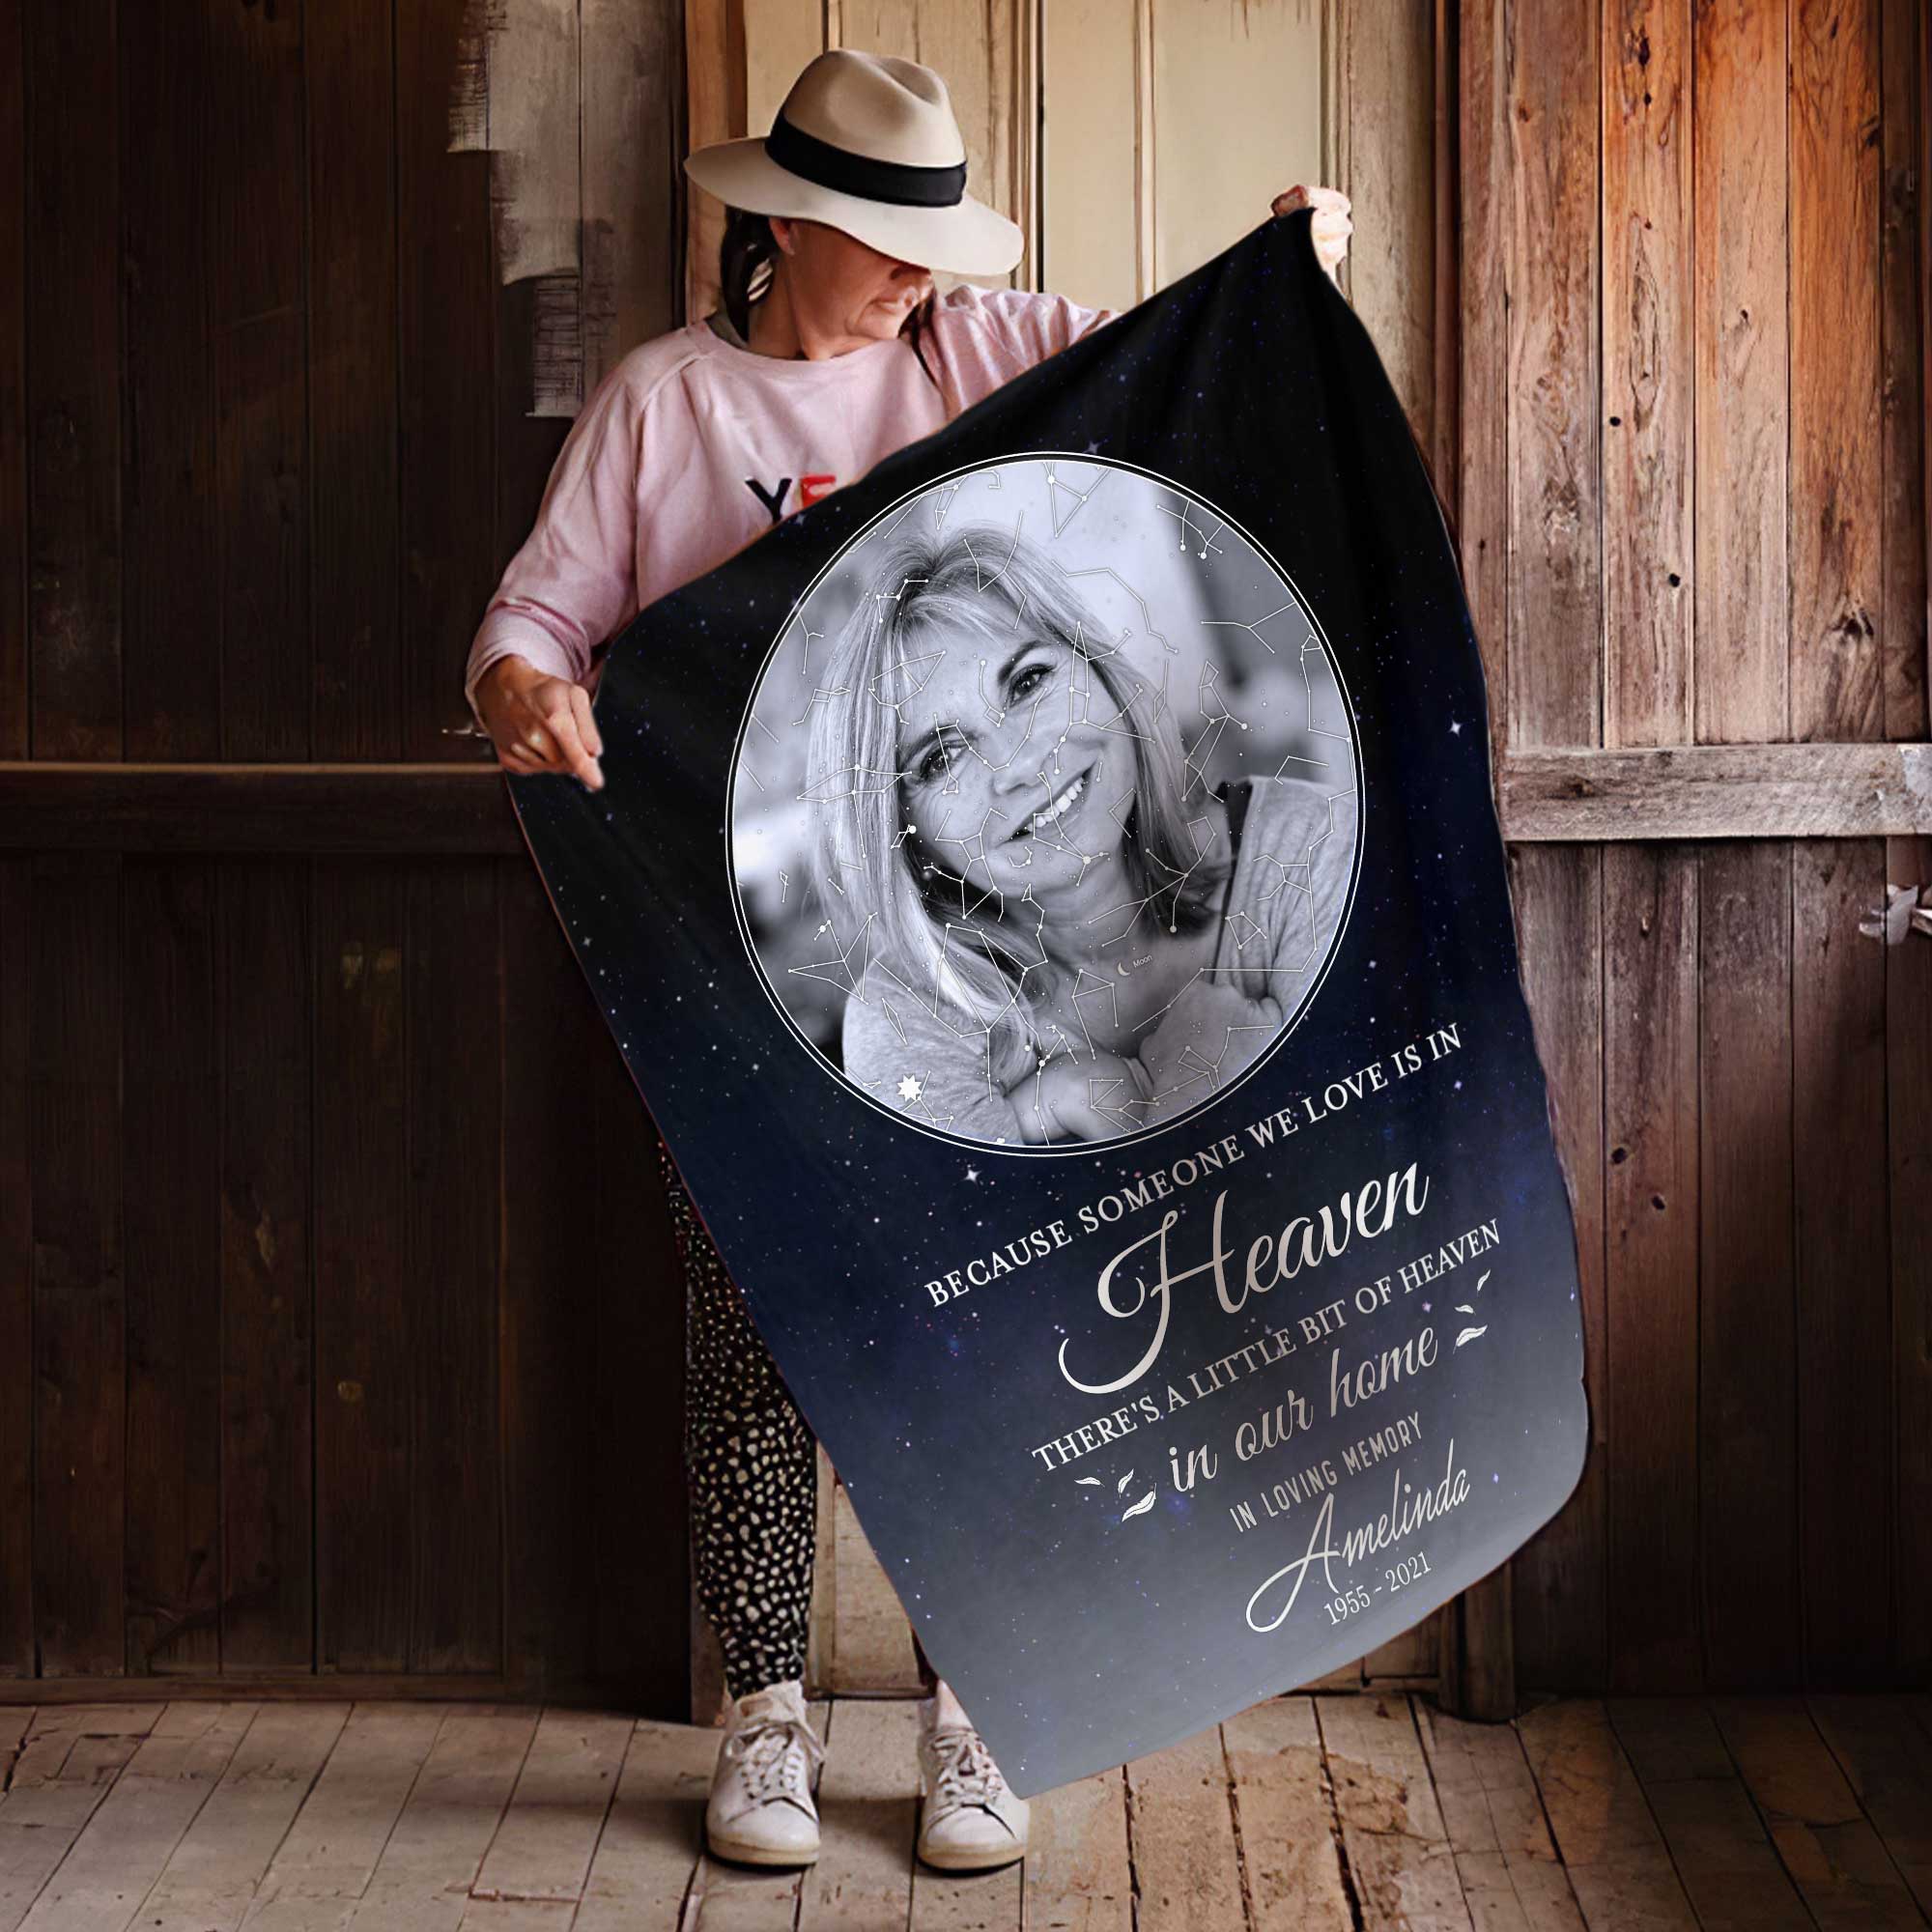 Personalized Memorial Star Map By Date Throw Blankets, Because Someone We Love Is In Heaven Funeral Gifts